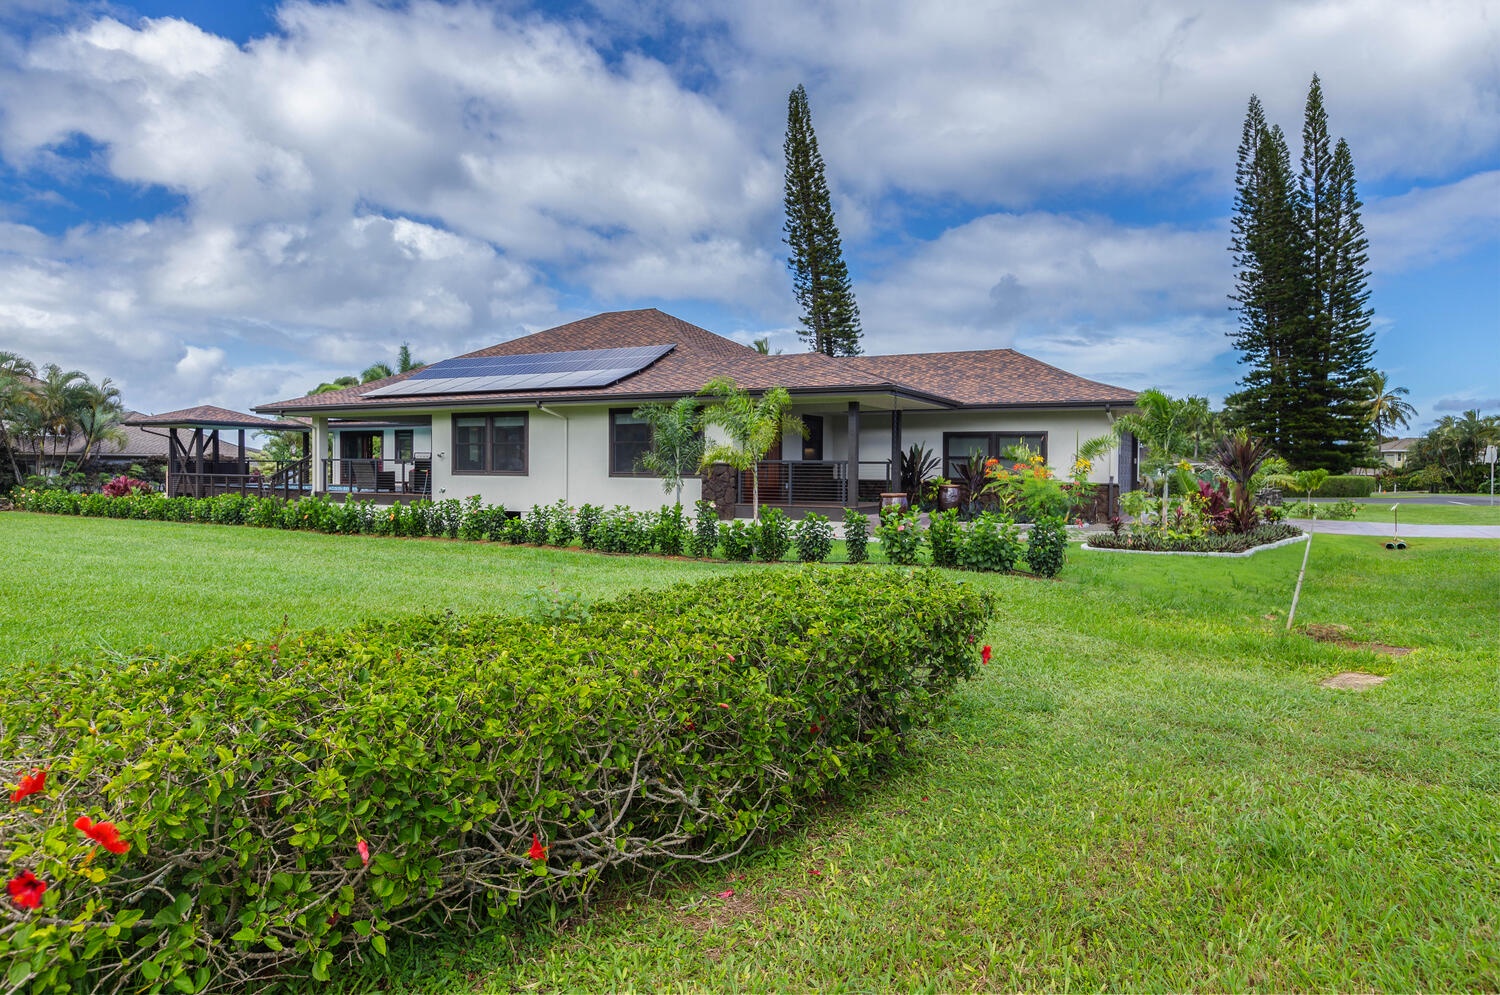 Princeville Vacation Rentals, Aloha Villa - View of property from the street